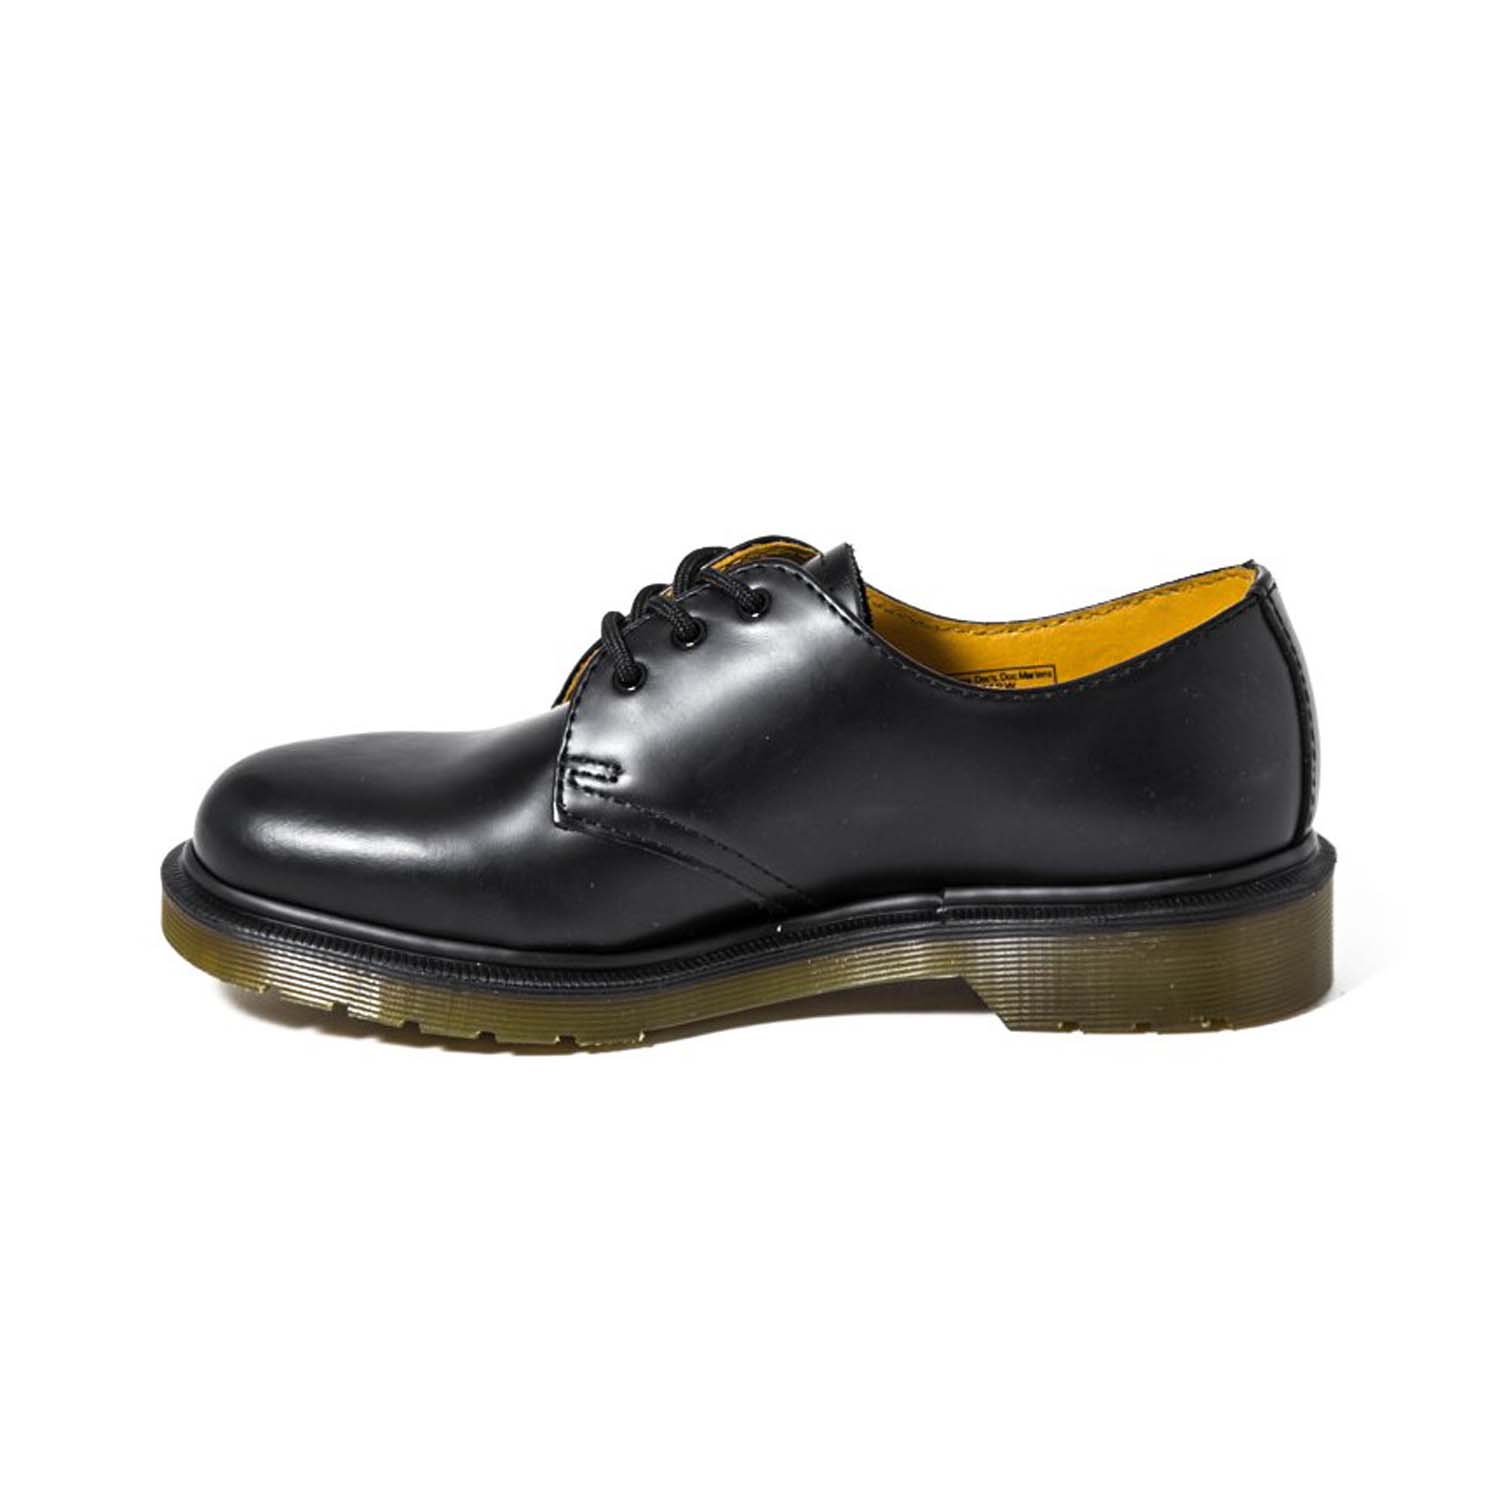 Dr Martens 1461 Pw Smooth Nero